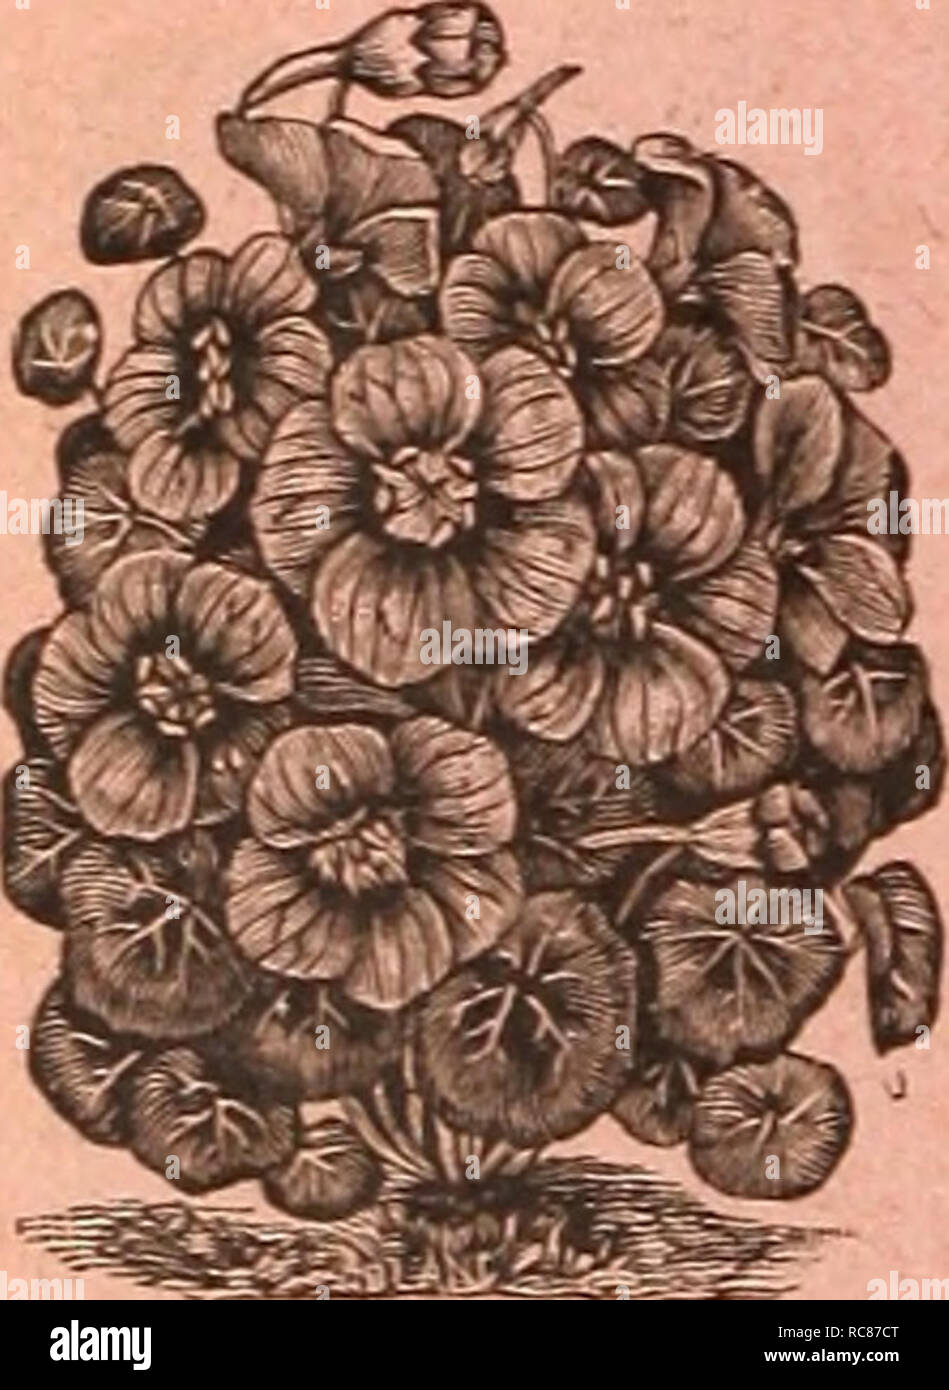 . Dreer's garden calendar : 1886. Seeds Catalogs; Nursery stock Catalogs; Gardening Catalogs; Flowers Seeds Catalogs; Gardening Equipment and supplies Catalogs. CHRYSANTHEMUM SEGETUM GRANDIFLORUM. No. 5495. Beautiful large blooms, of a bright sulphur- yellow color, measurinc; 2 to 24 inches in diameter and borne profusely. Per pkt., 15 cts. MIGNONETTE. MACHET. No. 610S. Well adapted for pot culture, as it comes per- fectly true from seed. The dwarf and vigorous plants are of pyramidal growth and furnished with very thick, dark green leaves, and throw up numerous flower stalks. It is entirely d Stock Photo